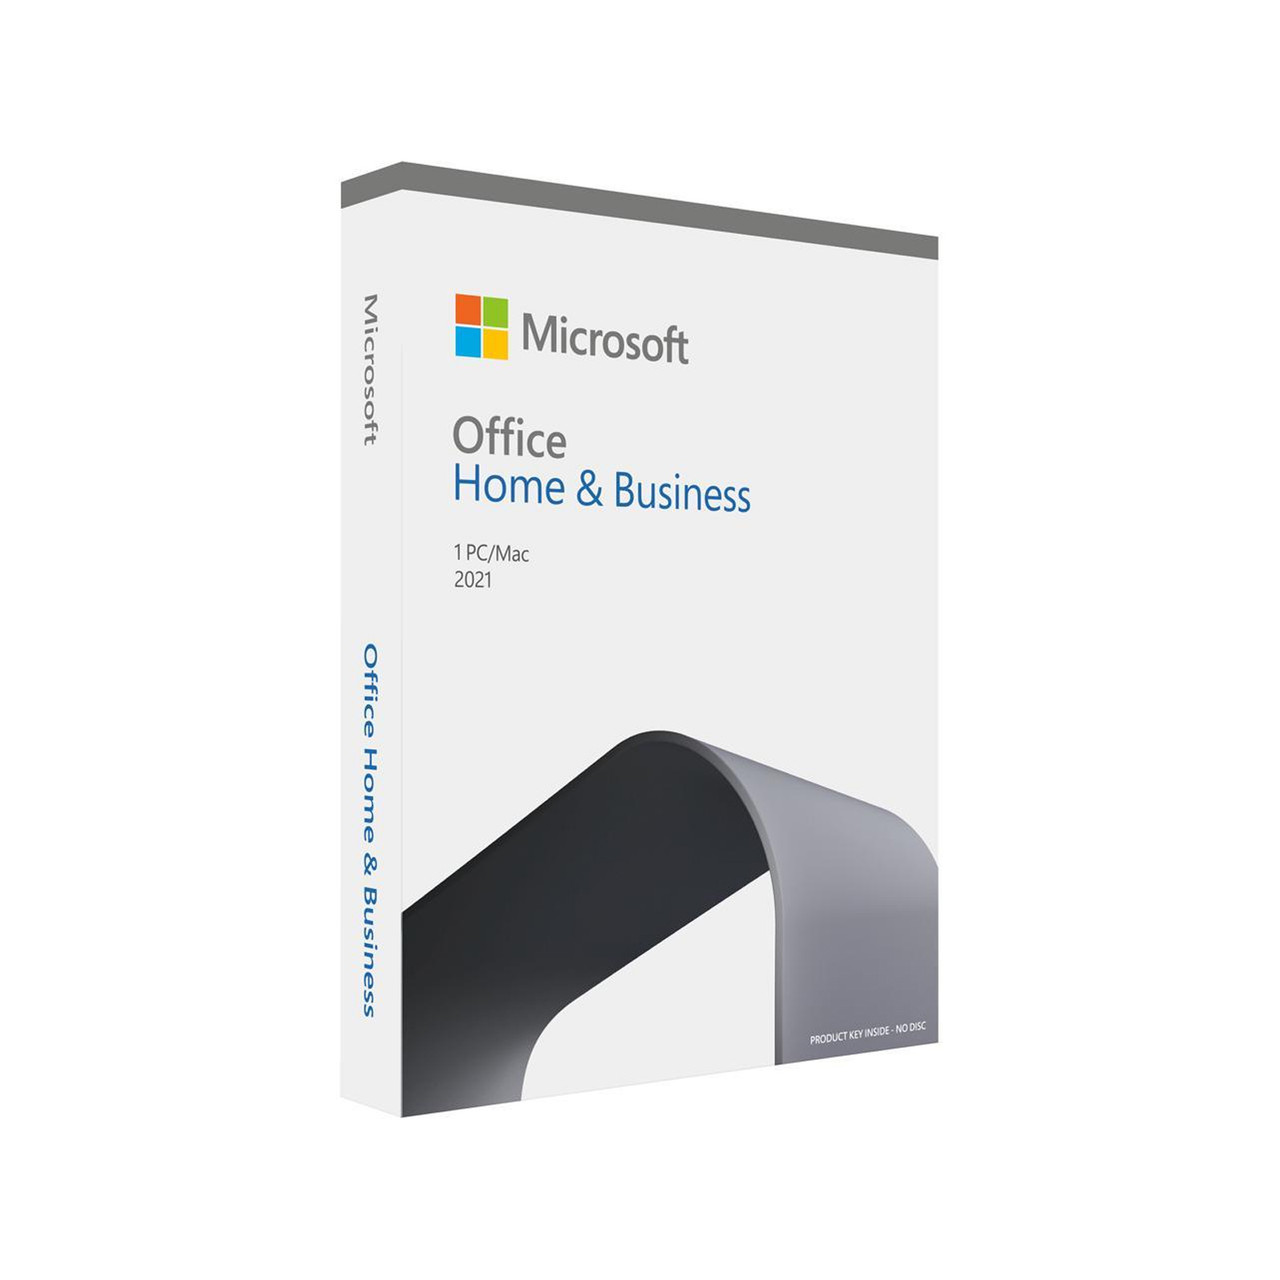 Microsoft Office Home & Business 2021 ,One Time Purchase, 1 Device , Windows 10 PC/Mac Keycard T5D-03518